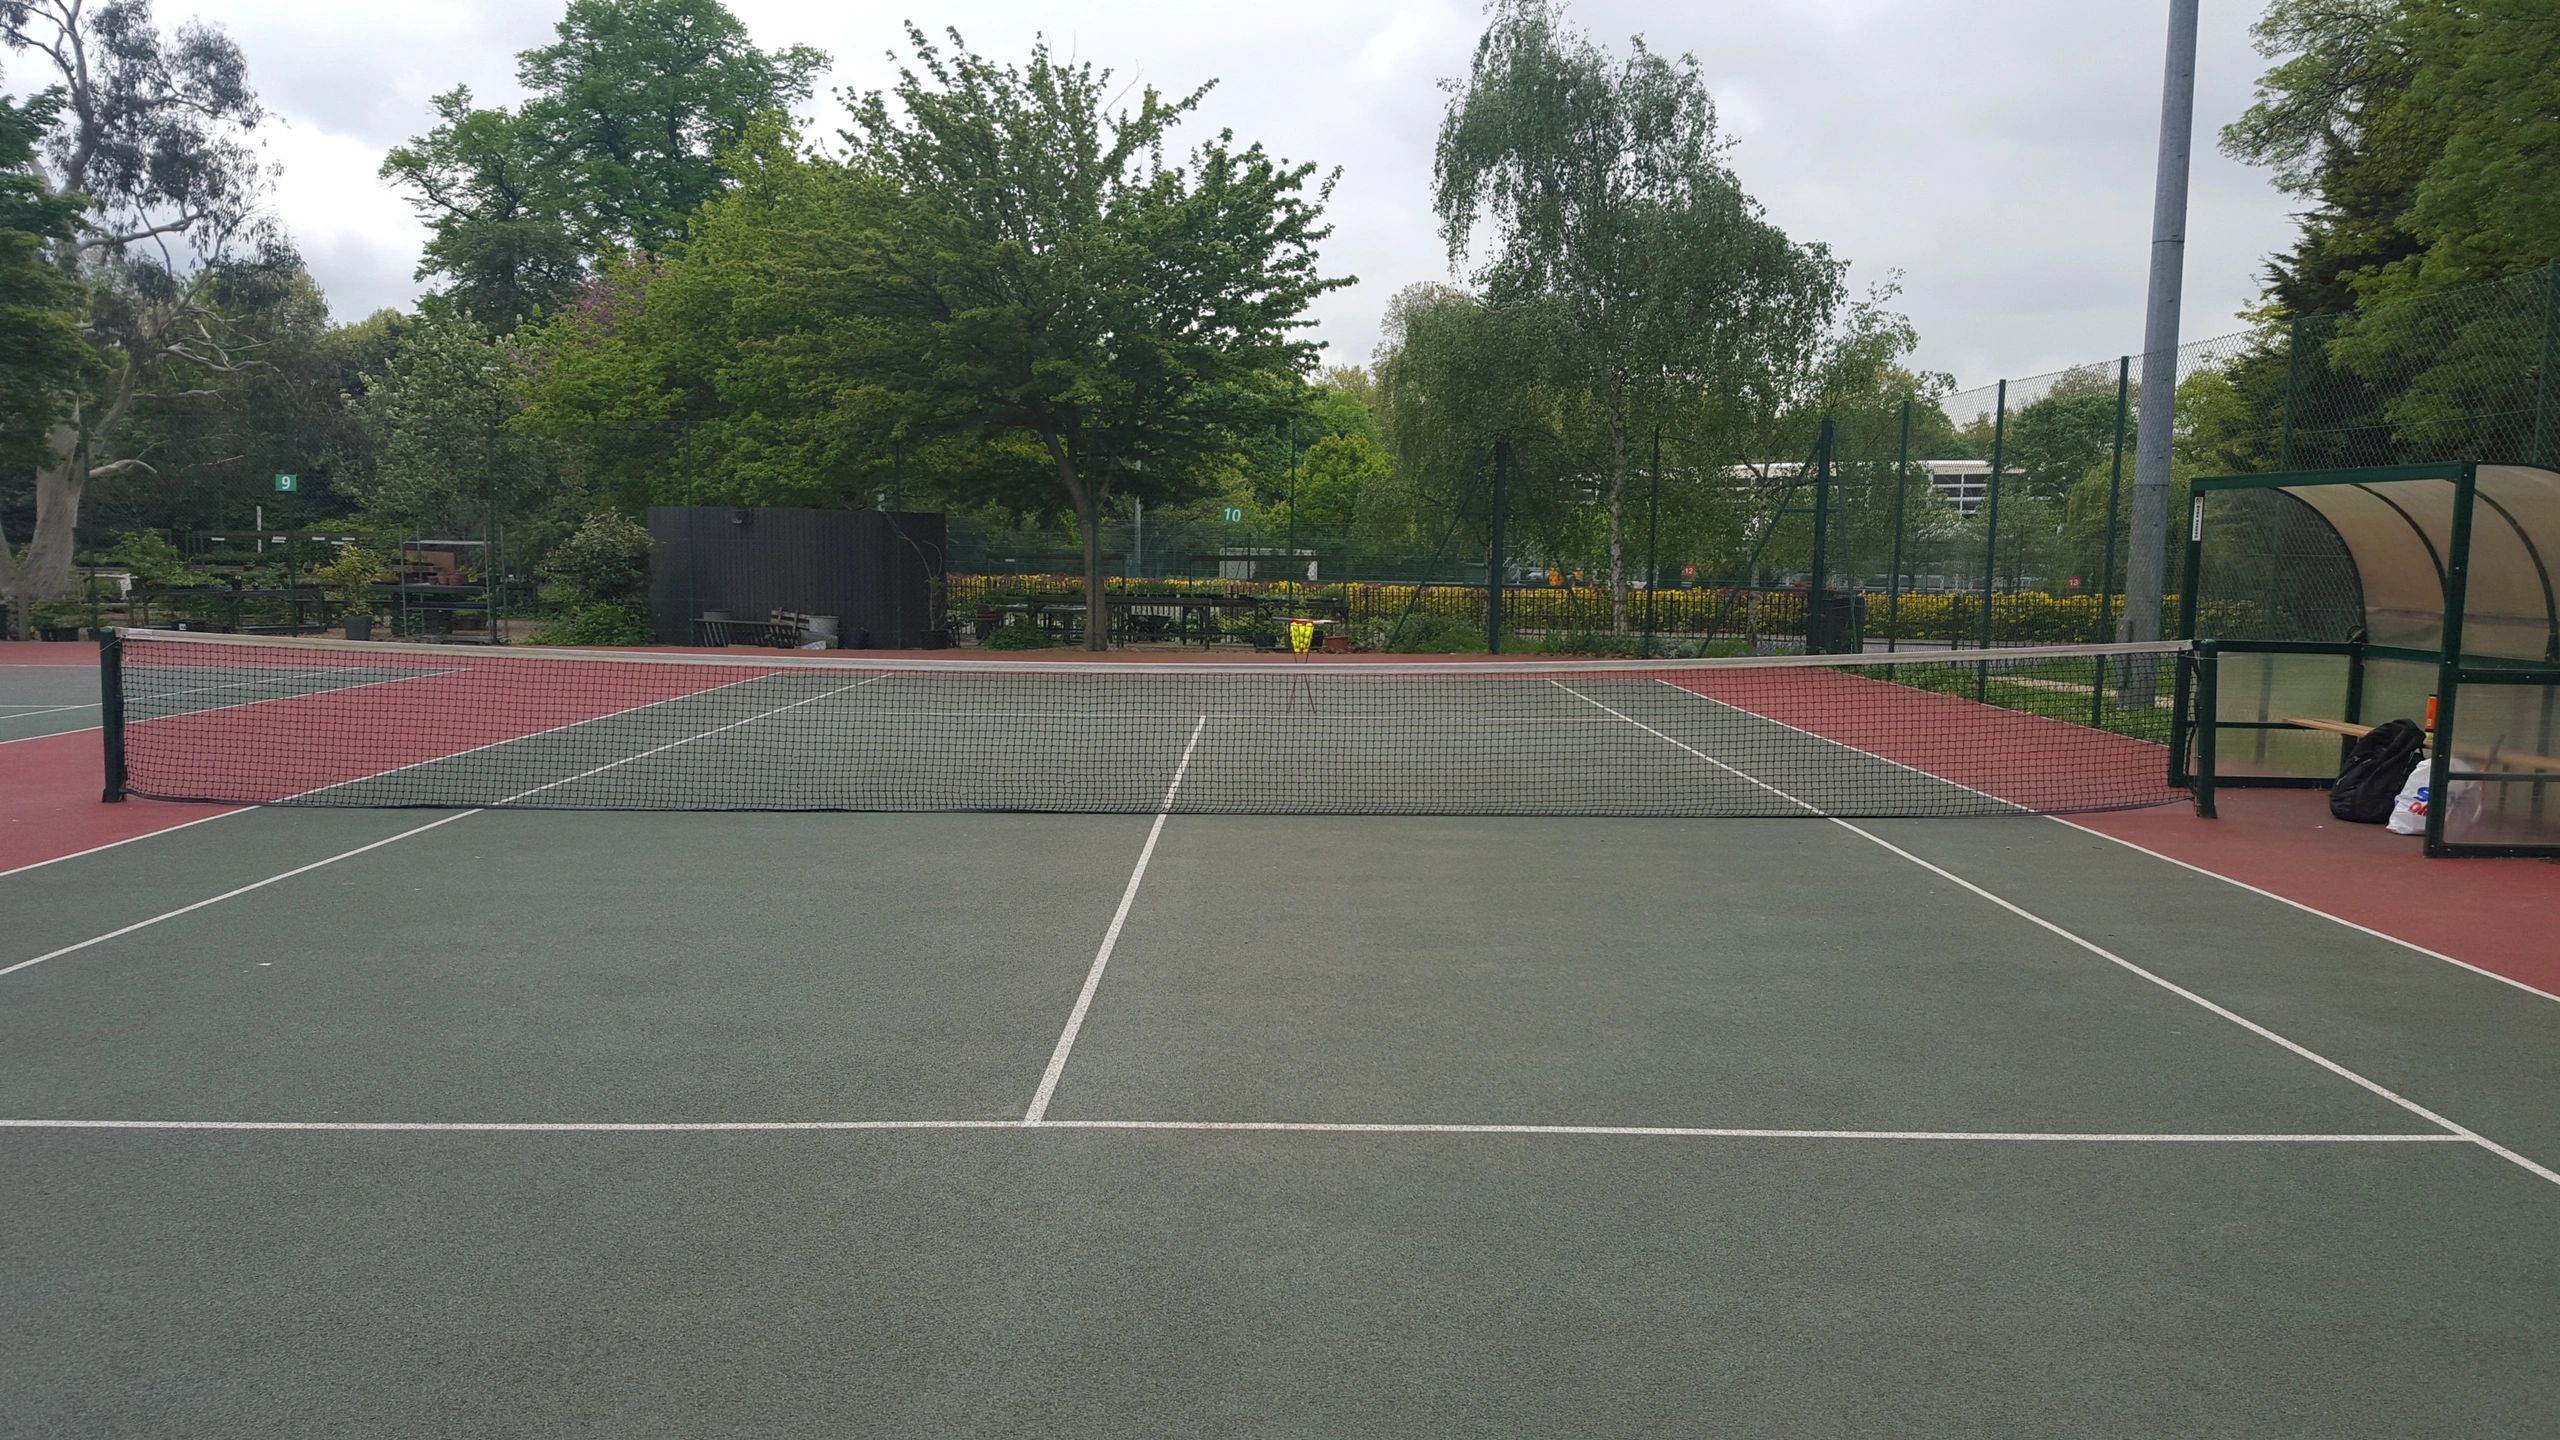 Tennis Lessons for Adults and Children at Battersea Park, London